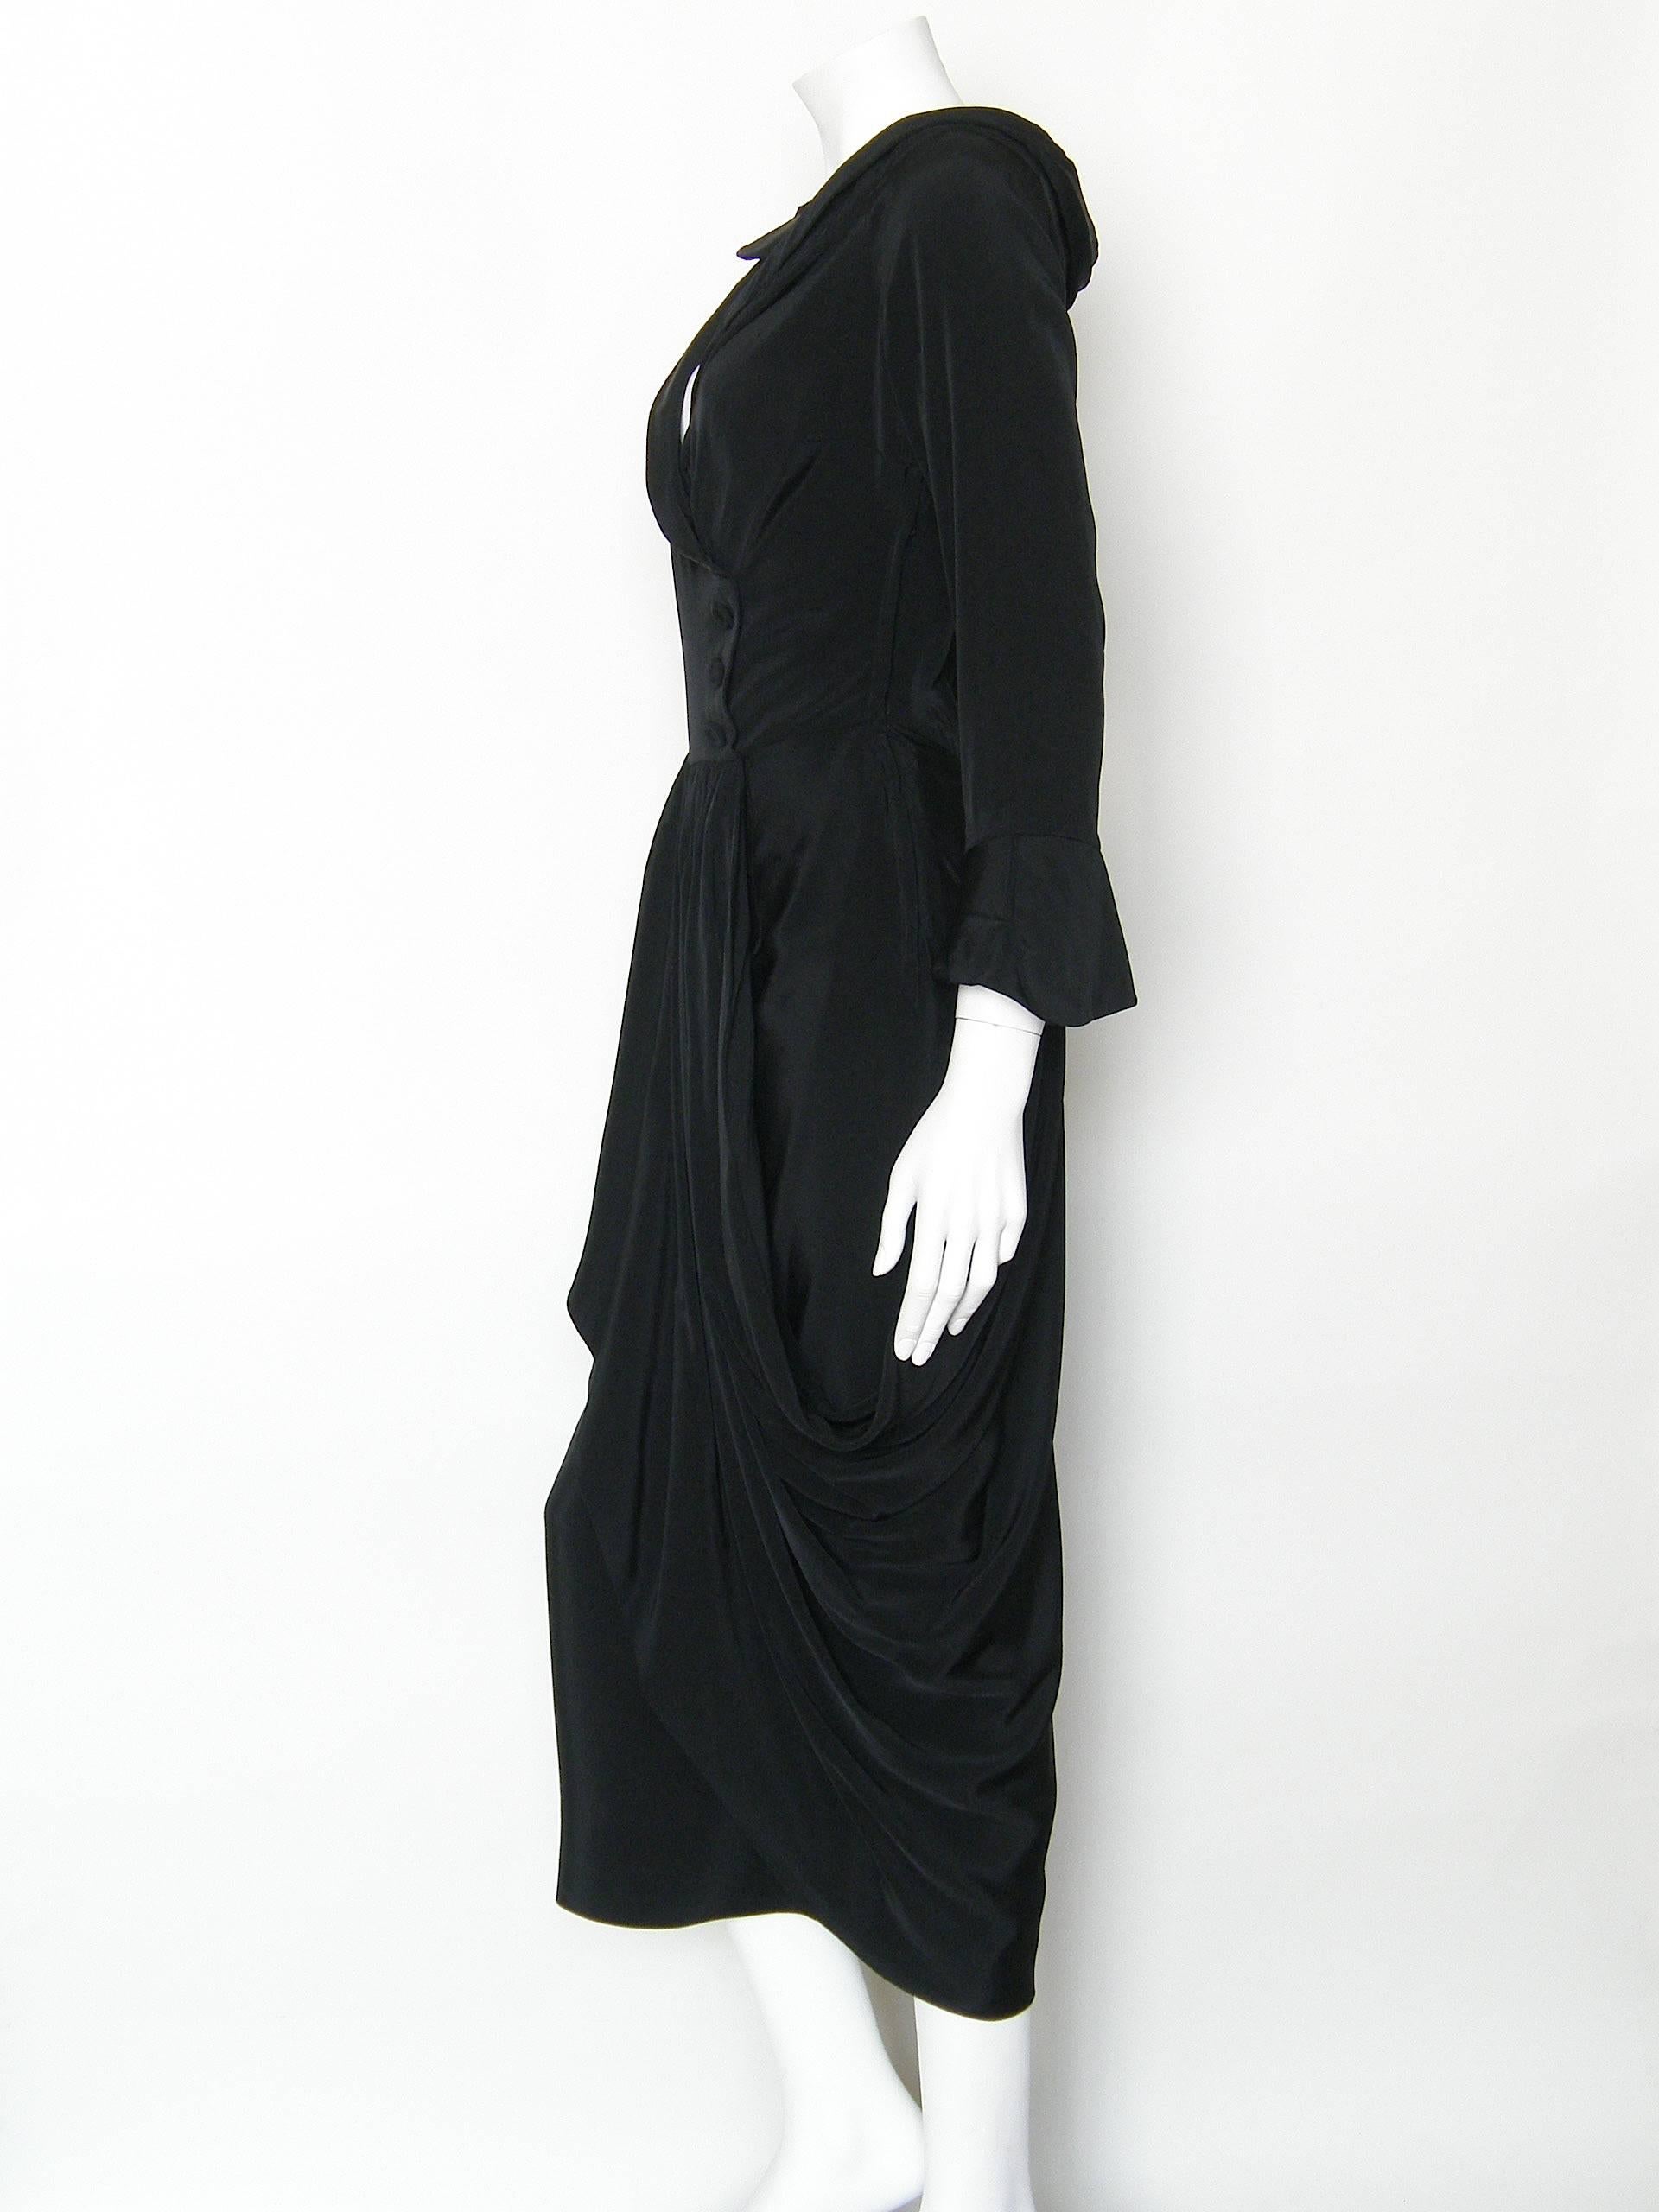 This beautifully constructed Ceil Chapman cocktail dress is very figure flattering. It has a fixed wrap cut with non-functioning buttons down the left side of the bodice, a portrait neckline, extravagant draping on the skirt, and long split cuffs on